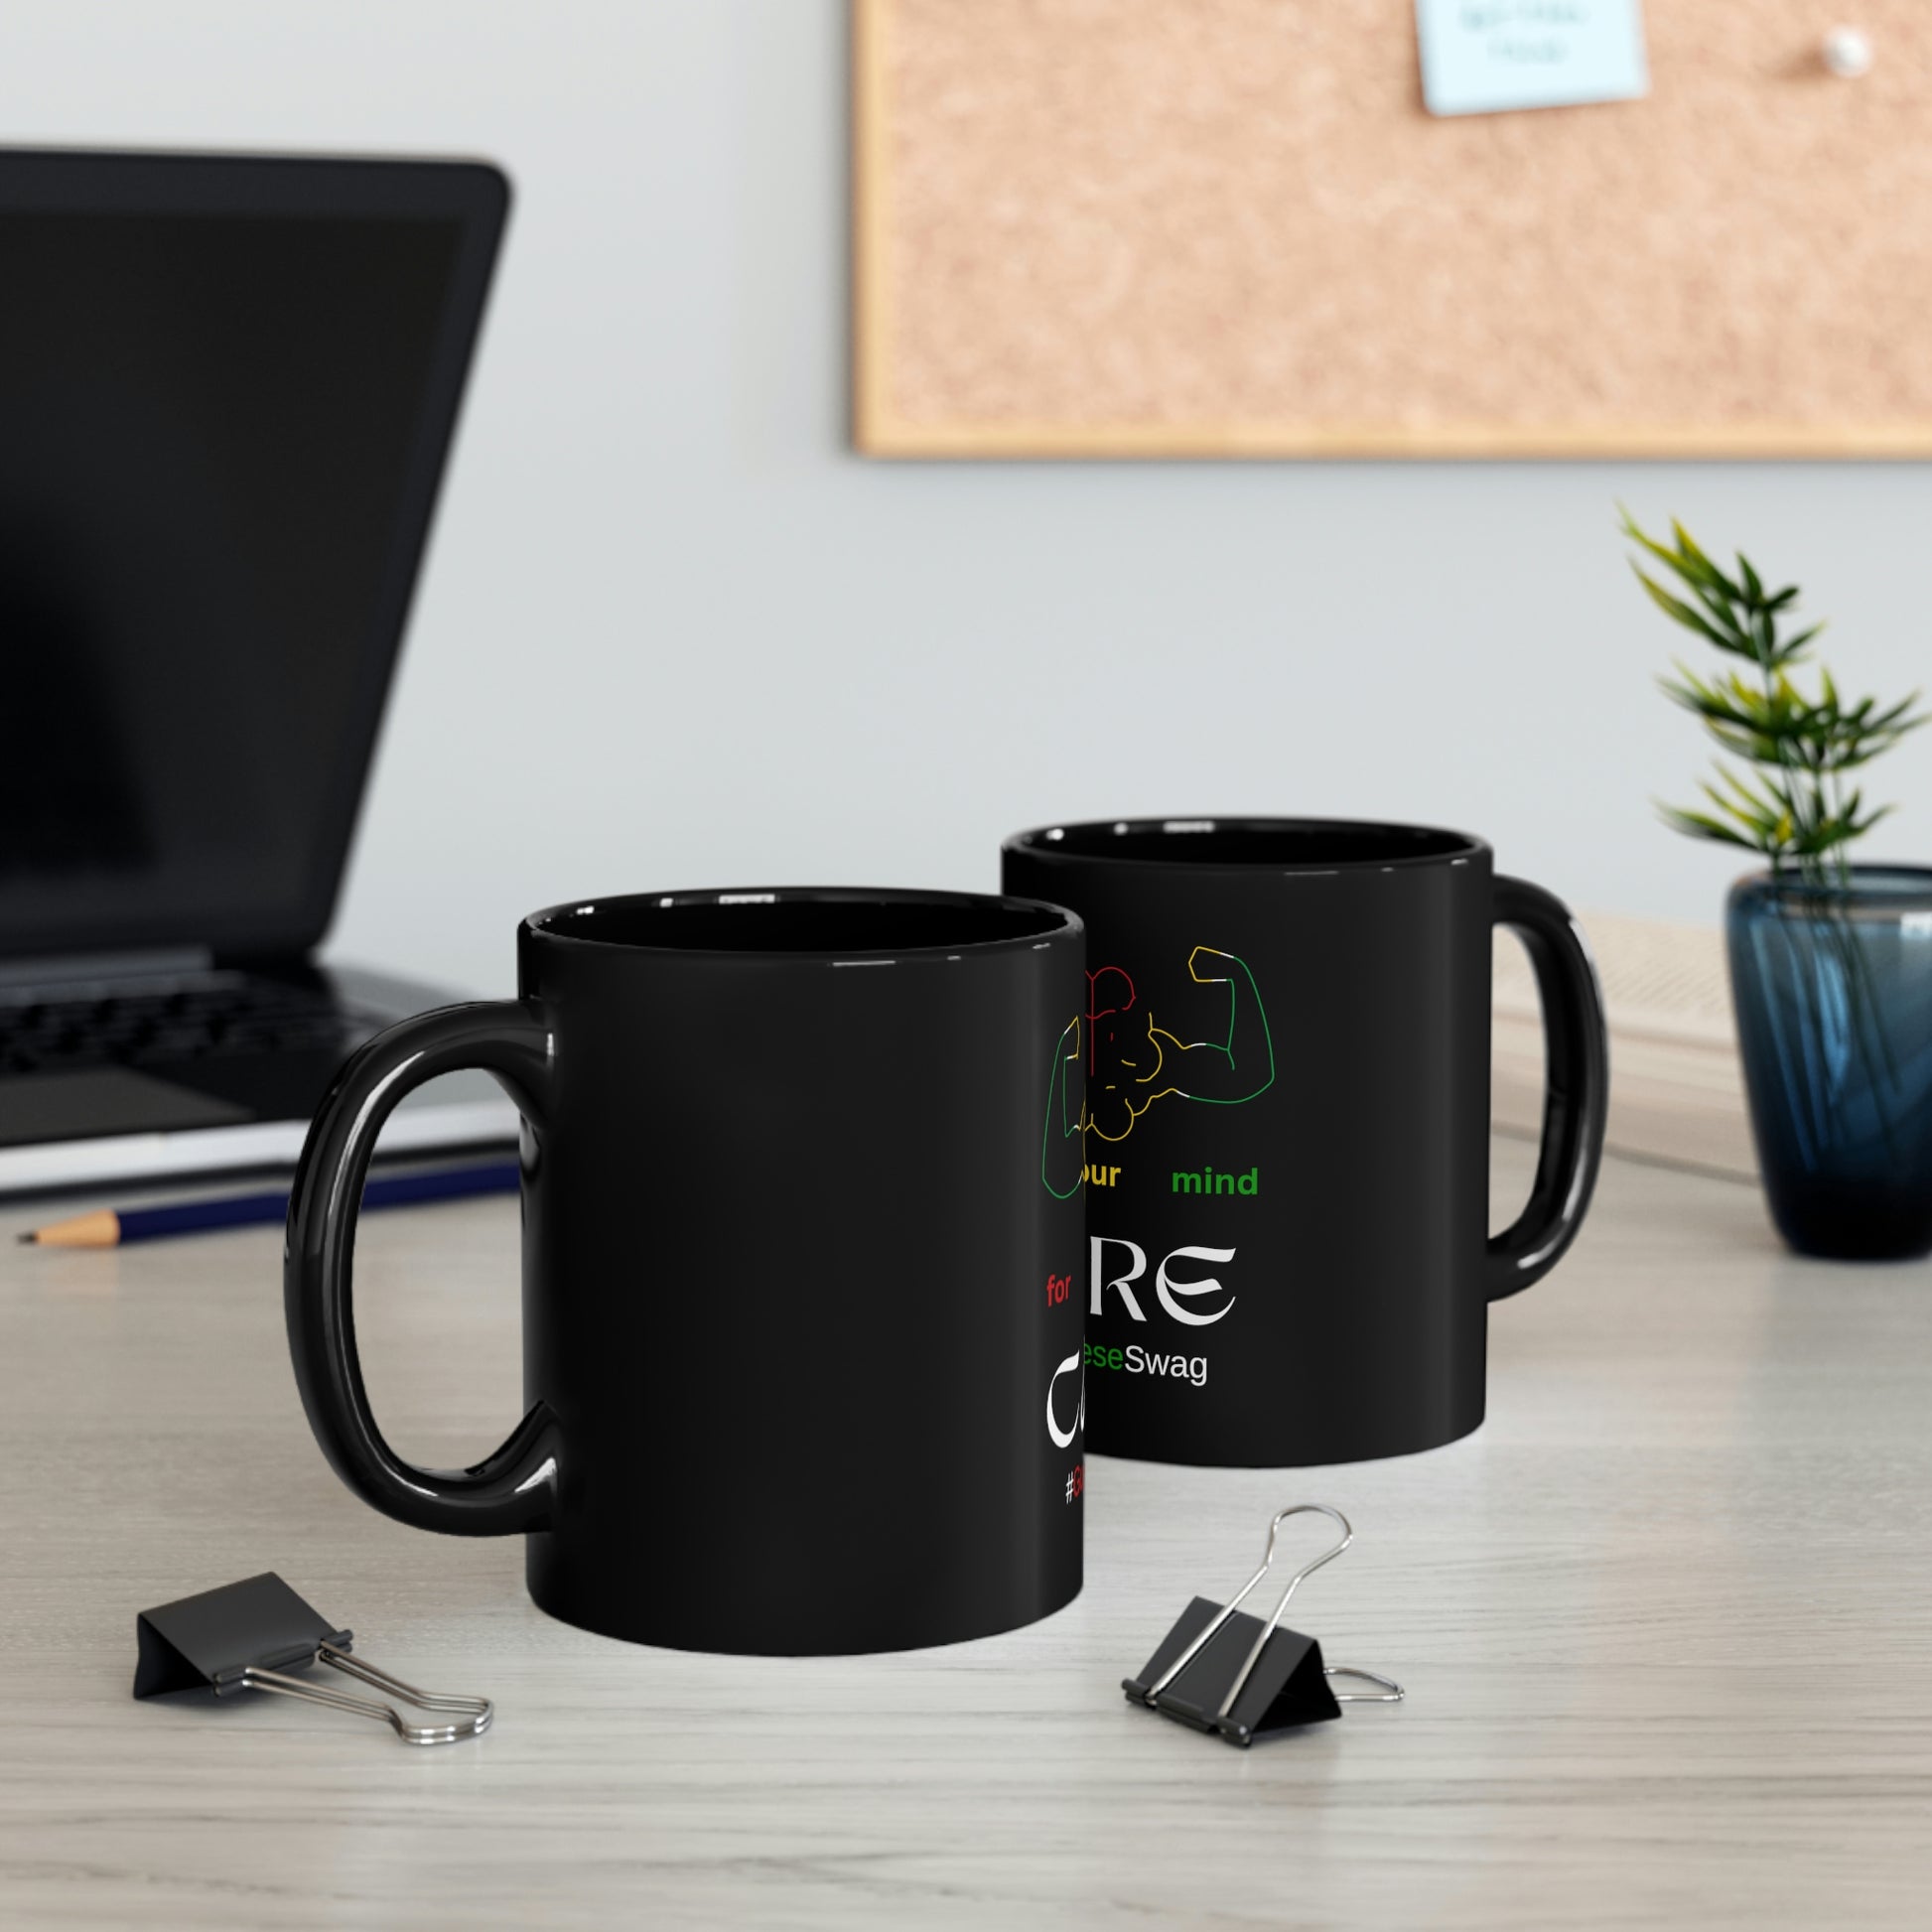 "Care For Your Mind" 11oz Black Mug by Guyanese Swag.